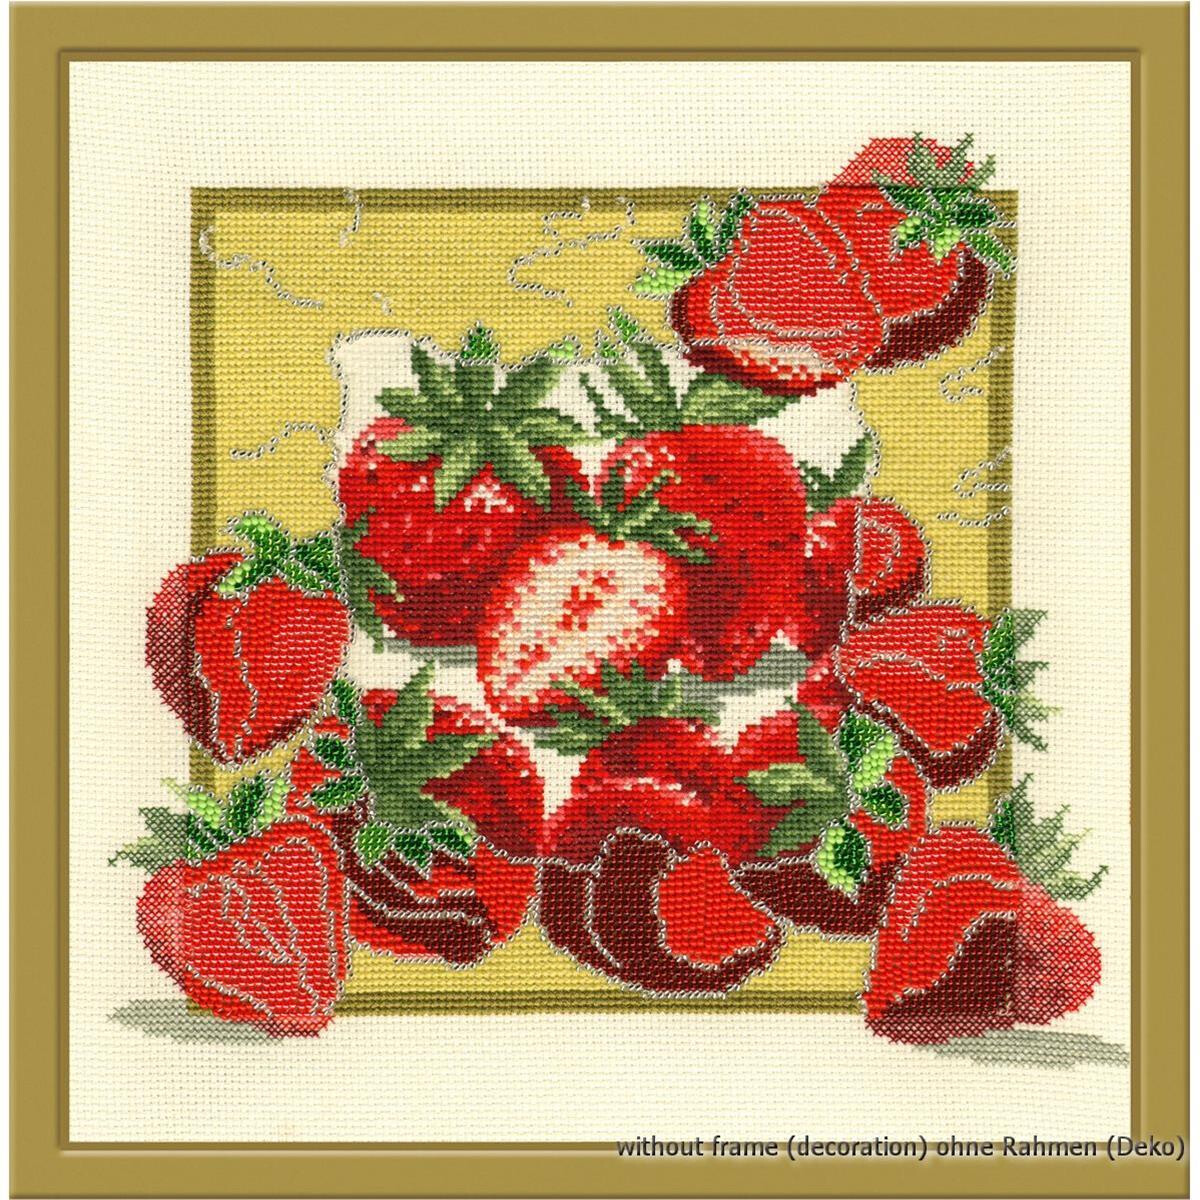 Oven counted cross stitch kit "Gifts of the gardens....